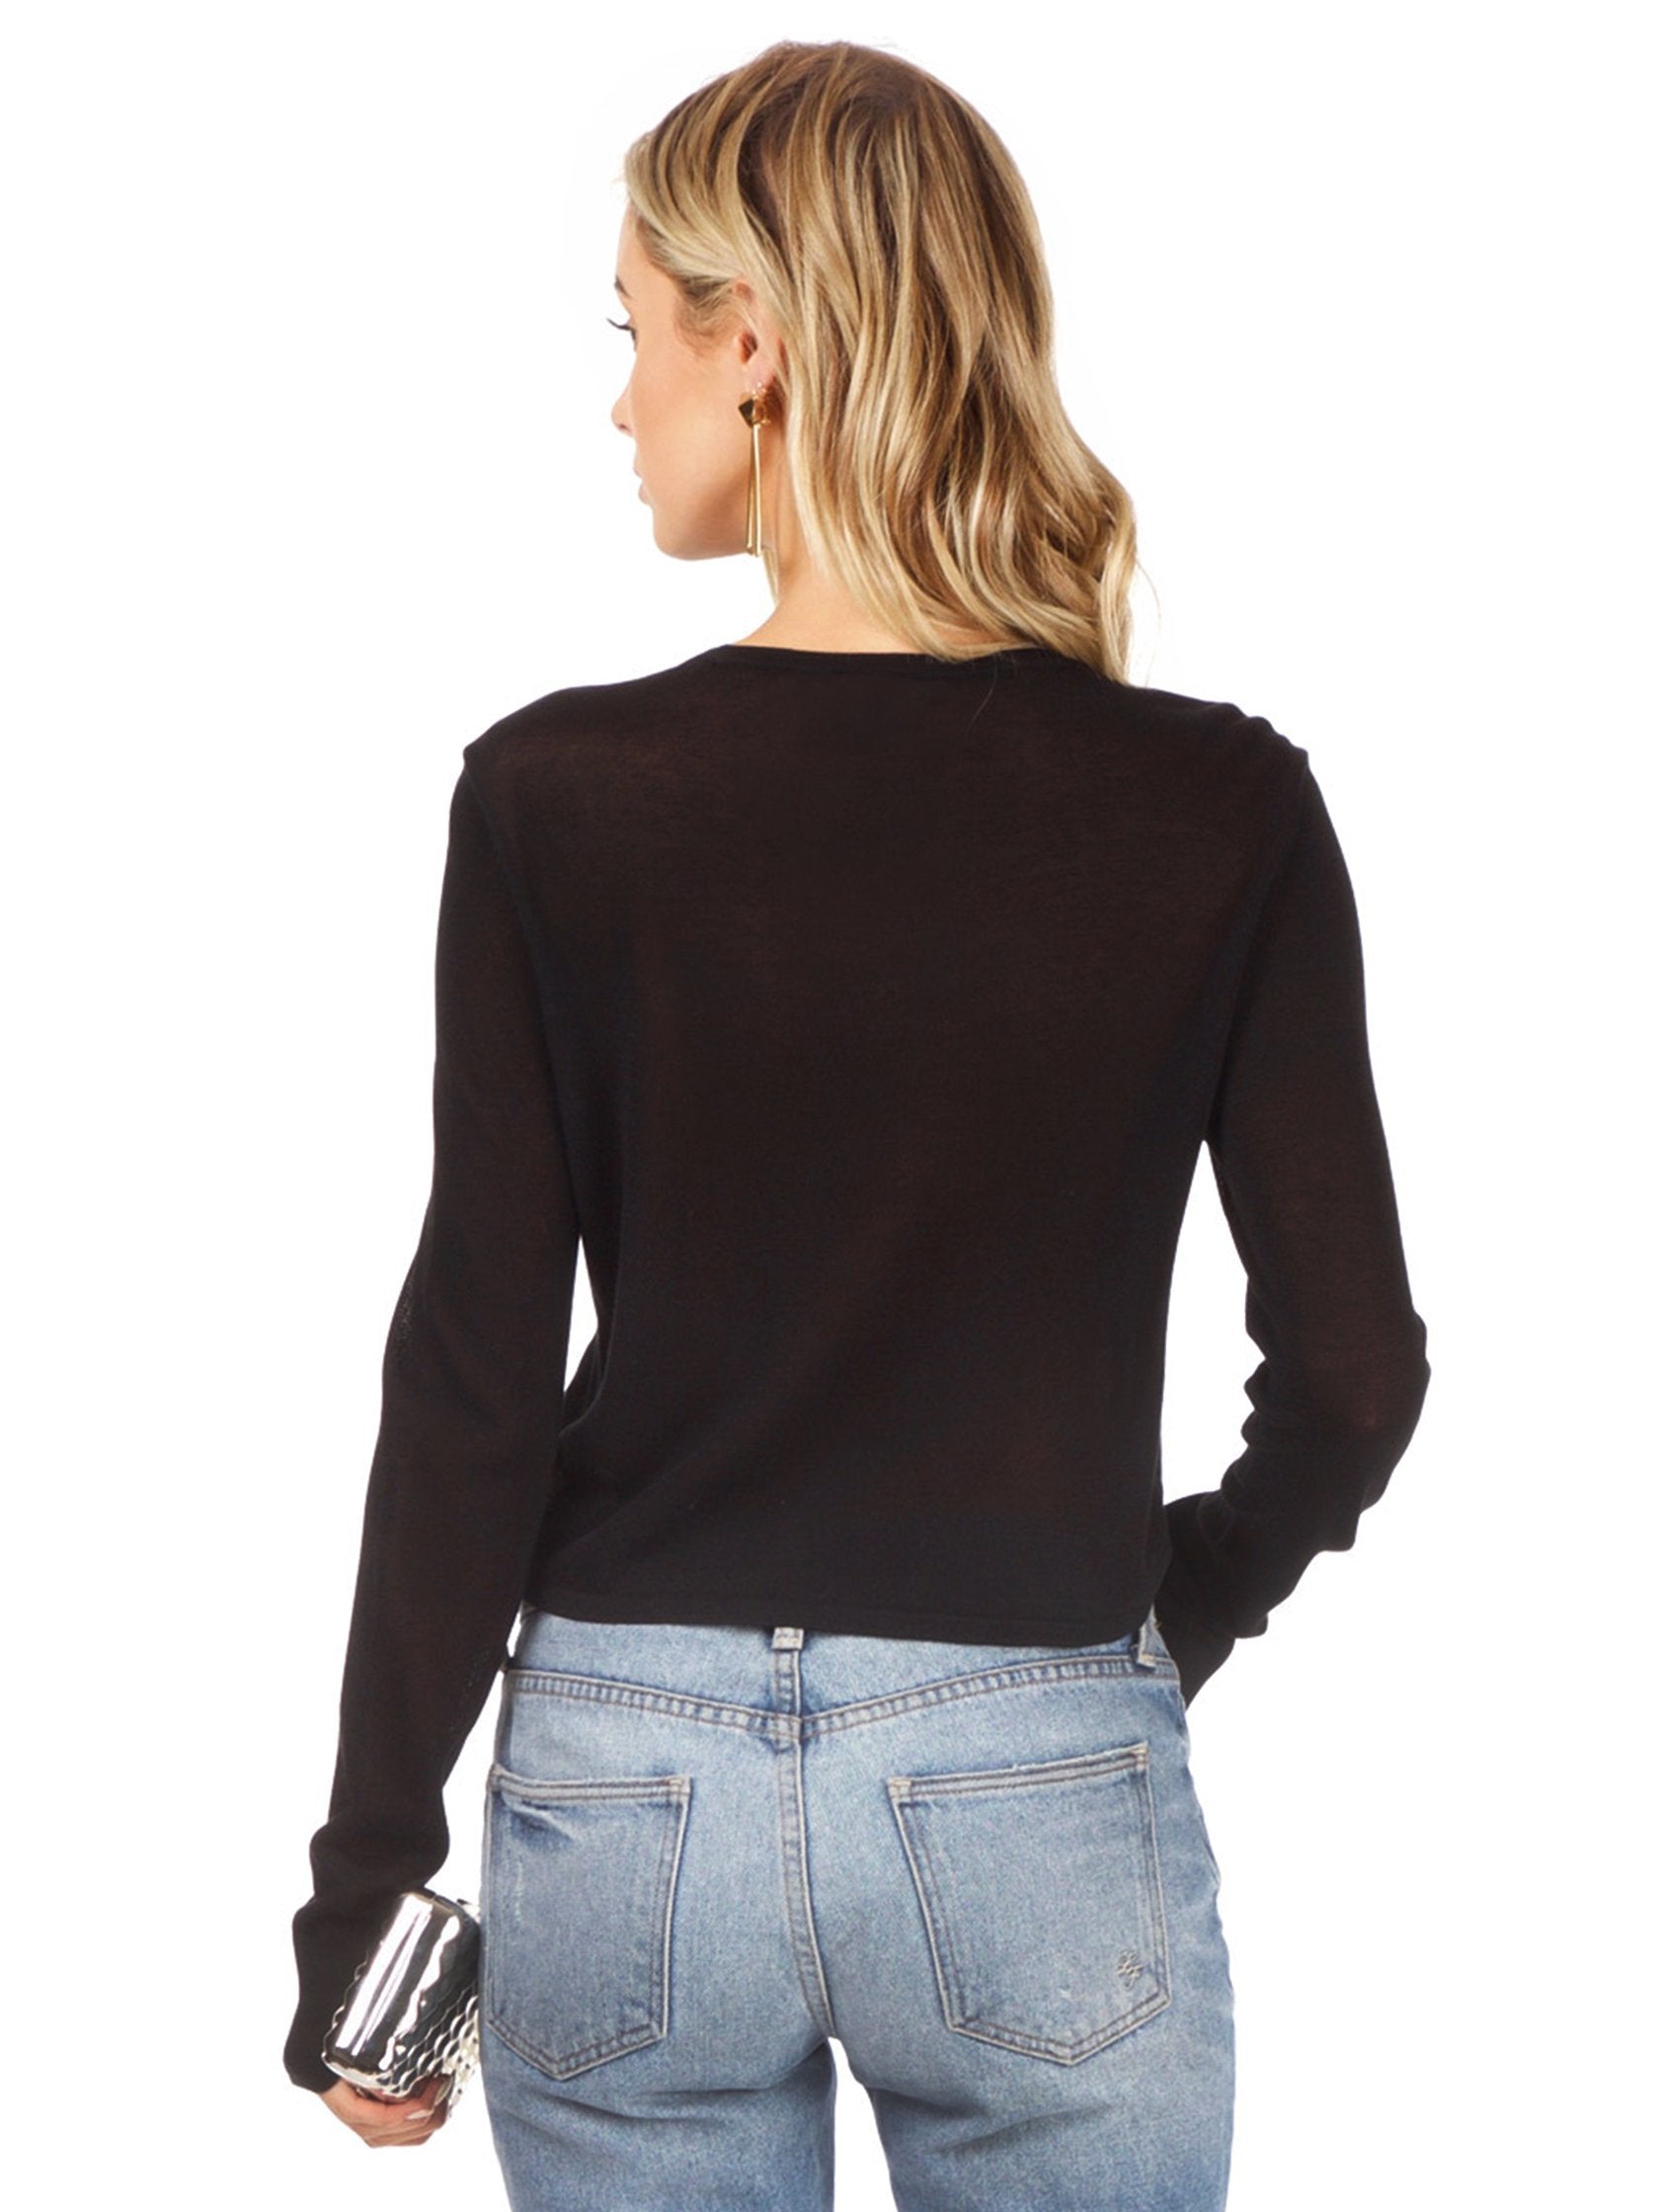 Women outfit in a top rental from BCBGMAXAZRIA called Renea Cropped Sweater Top